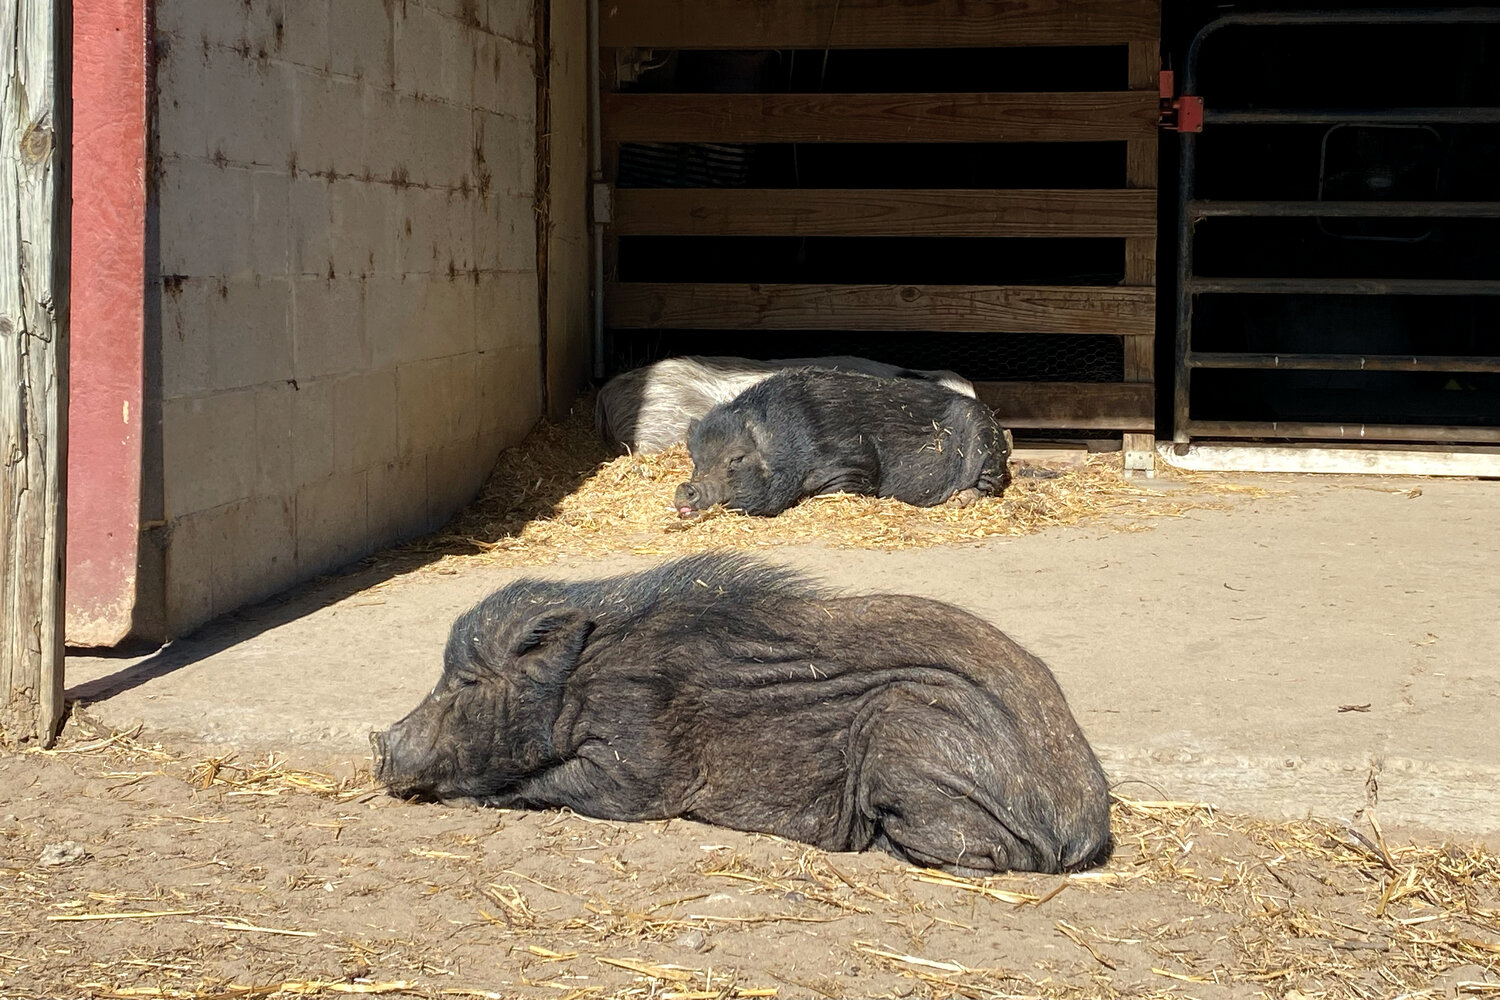 Cotton Branch Farm Sanctuary cares for about 200 potbelly pigs, several of which are sponsored by members of the community.